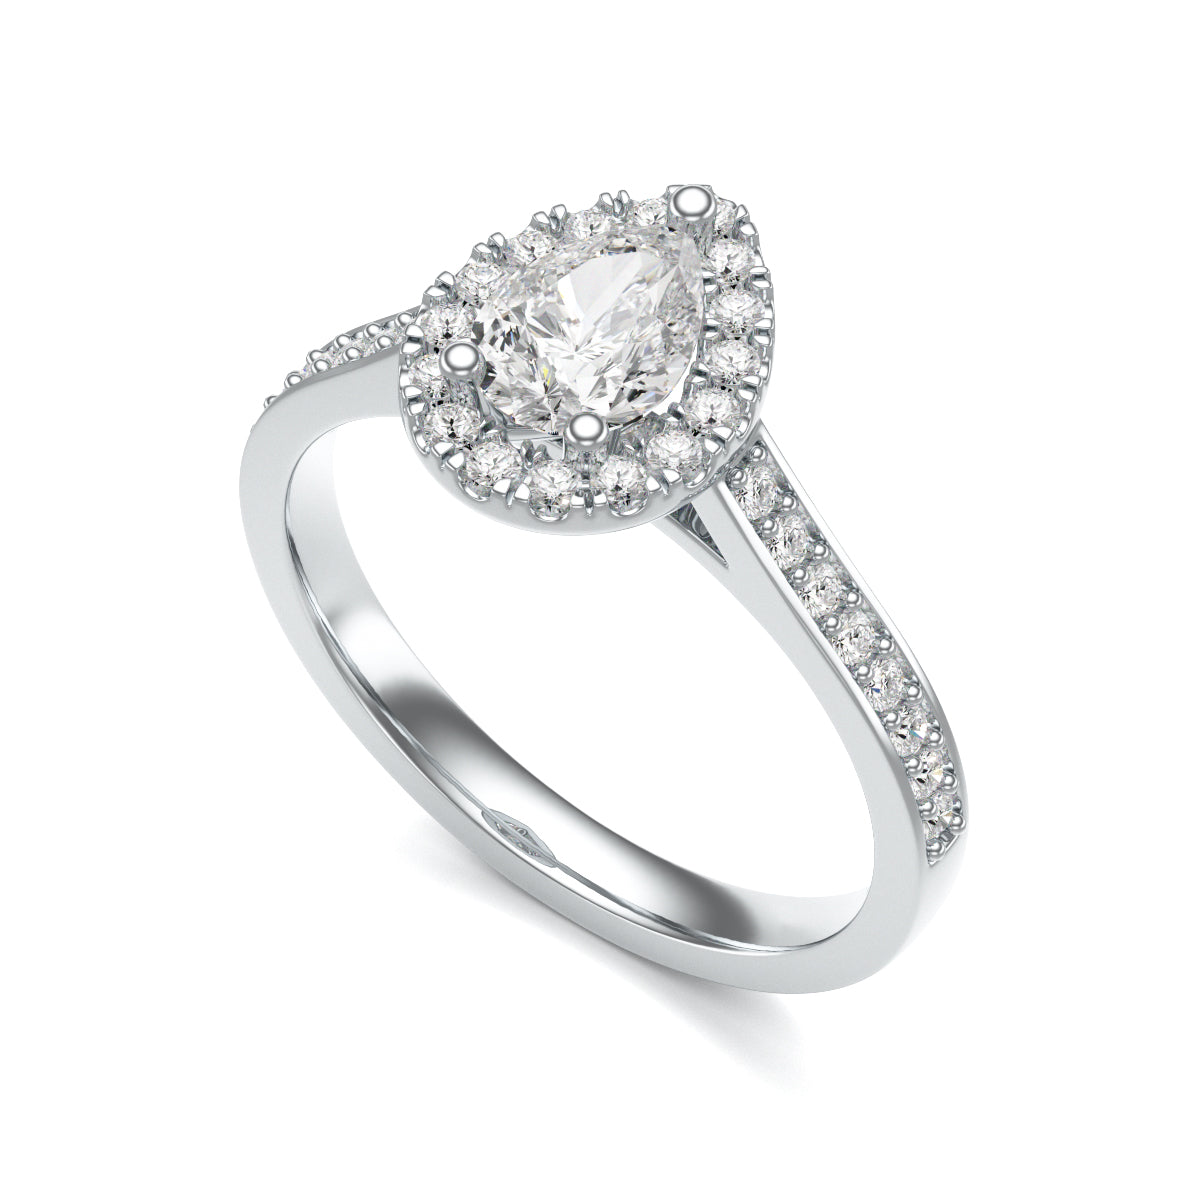 Diamond Engagement Ring- Pear Shaped Halo With Diamond Set Shoulders